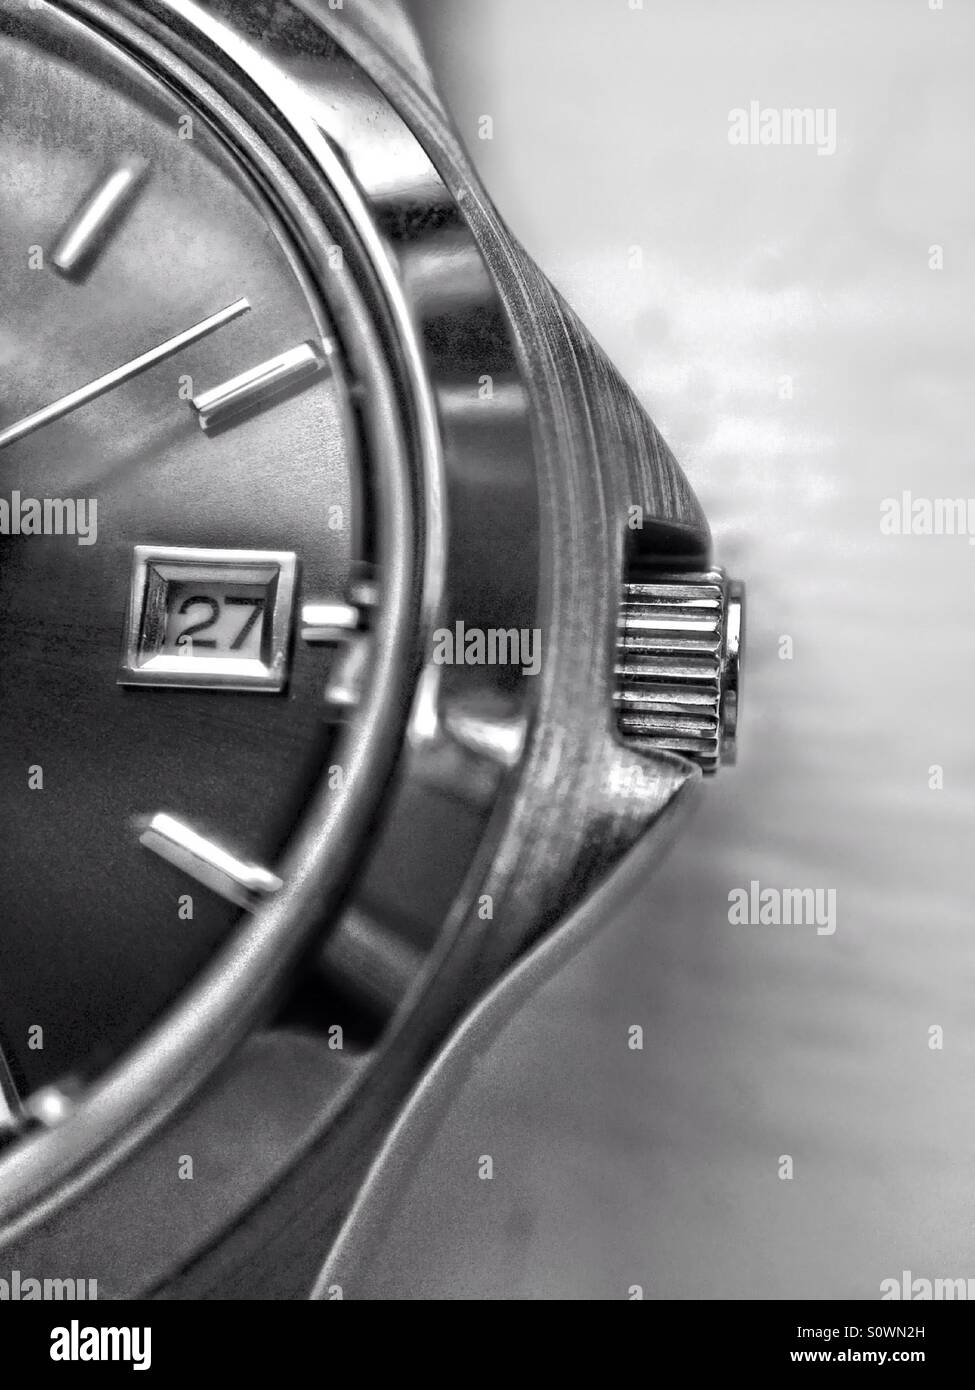 Close up of a watch face Stock Photo